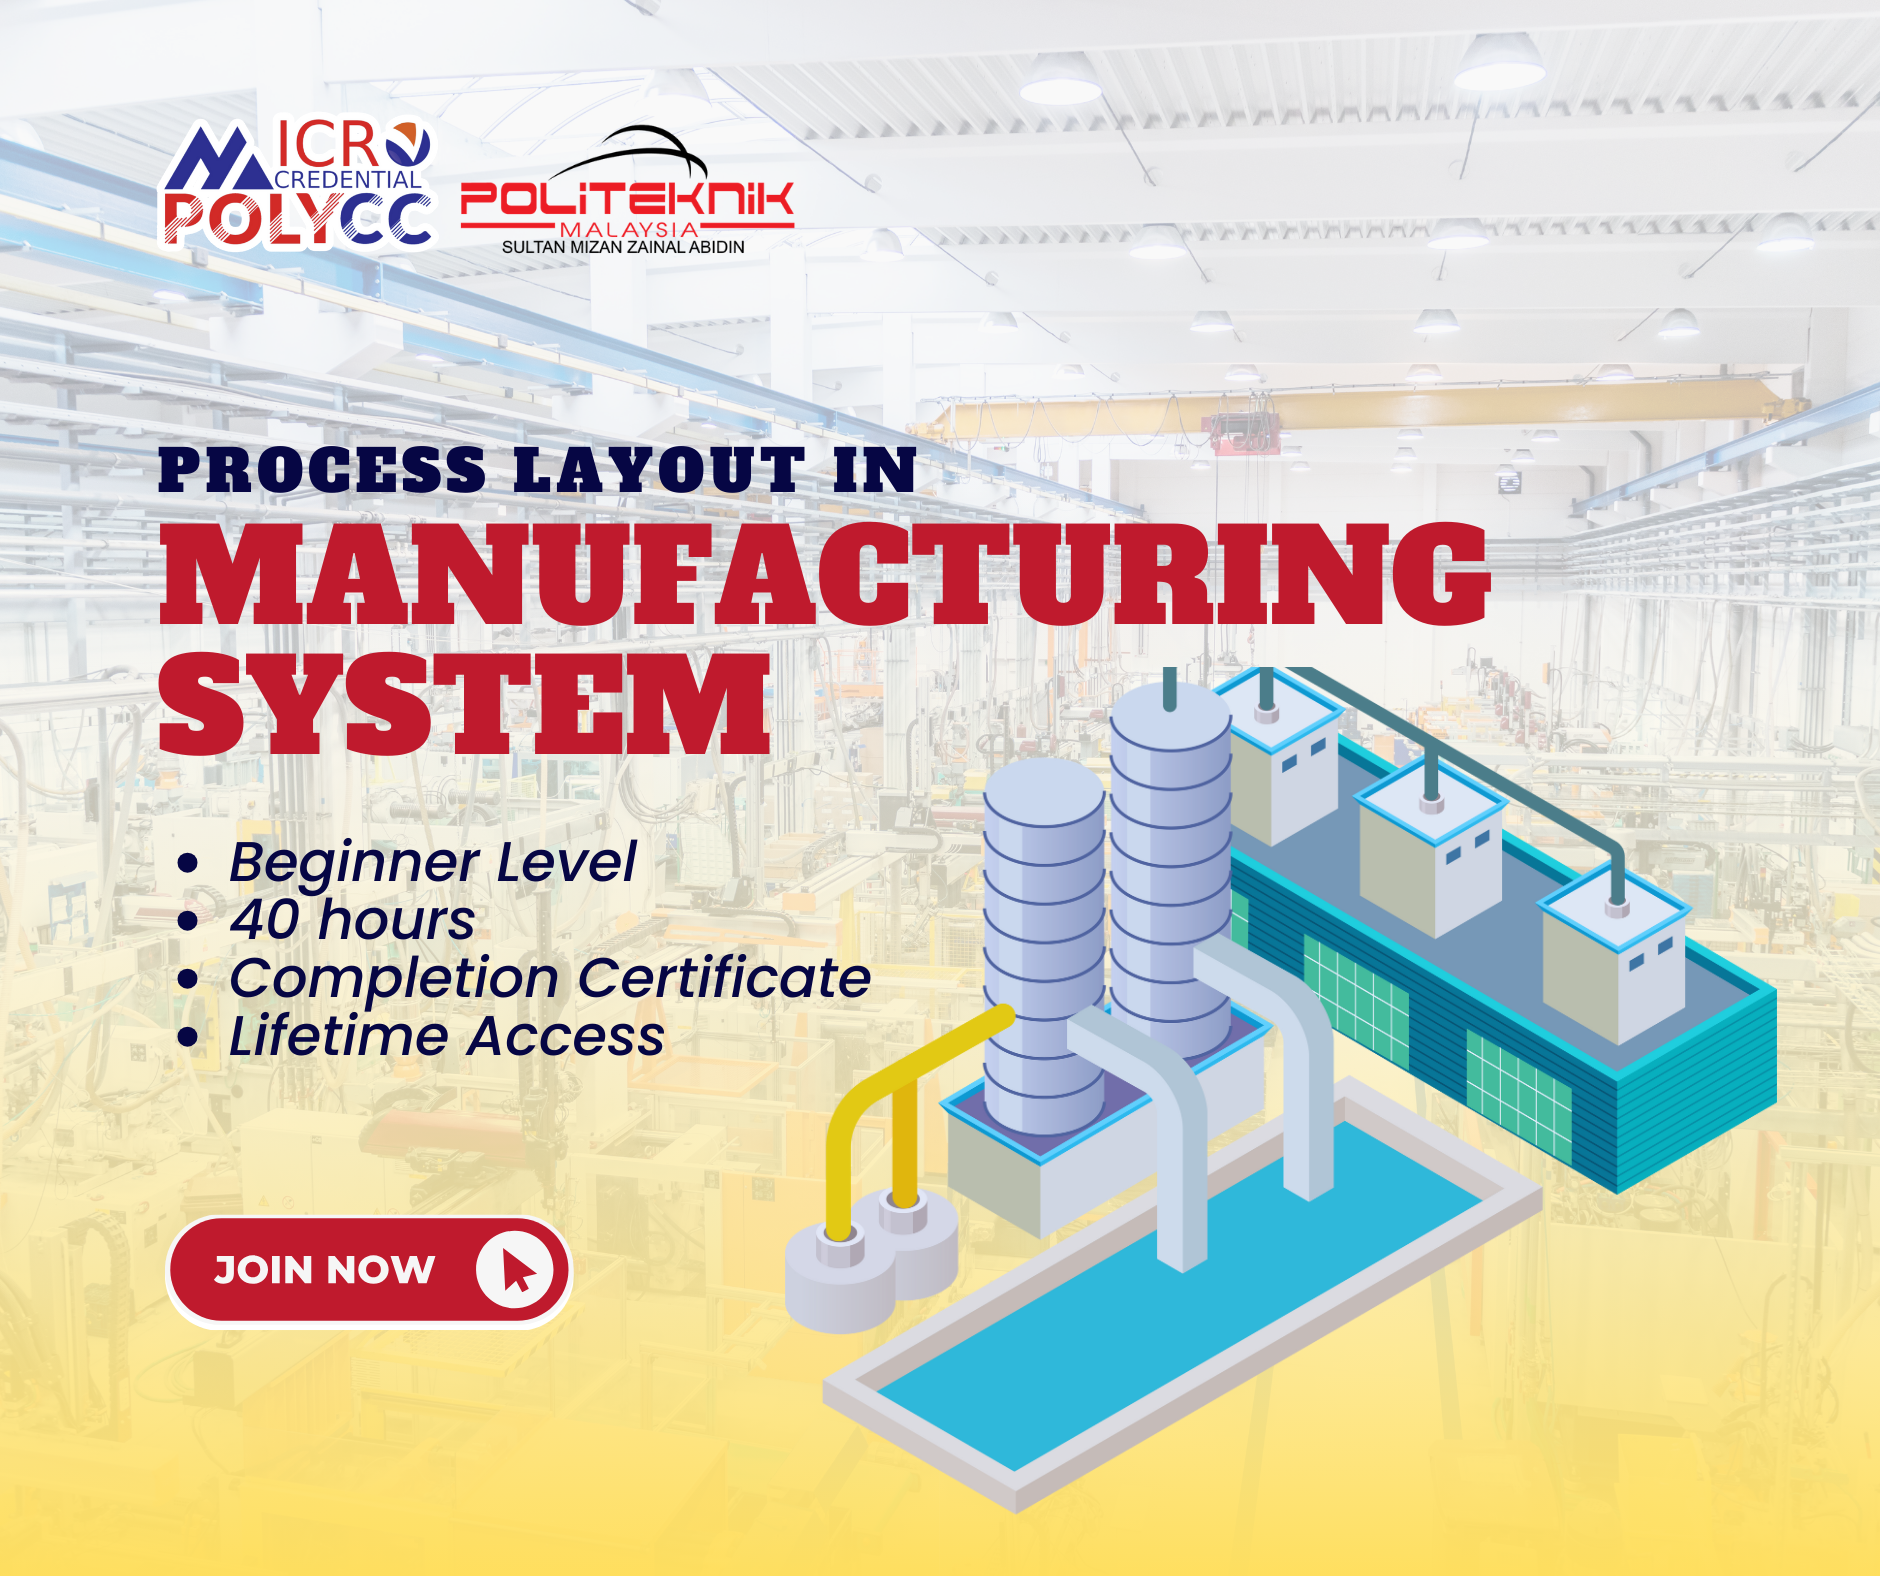 PROCESS LAYOUT IN MANUFACTURING SYSTEM